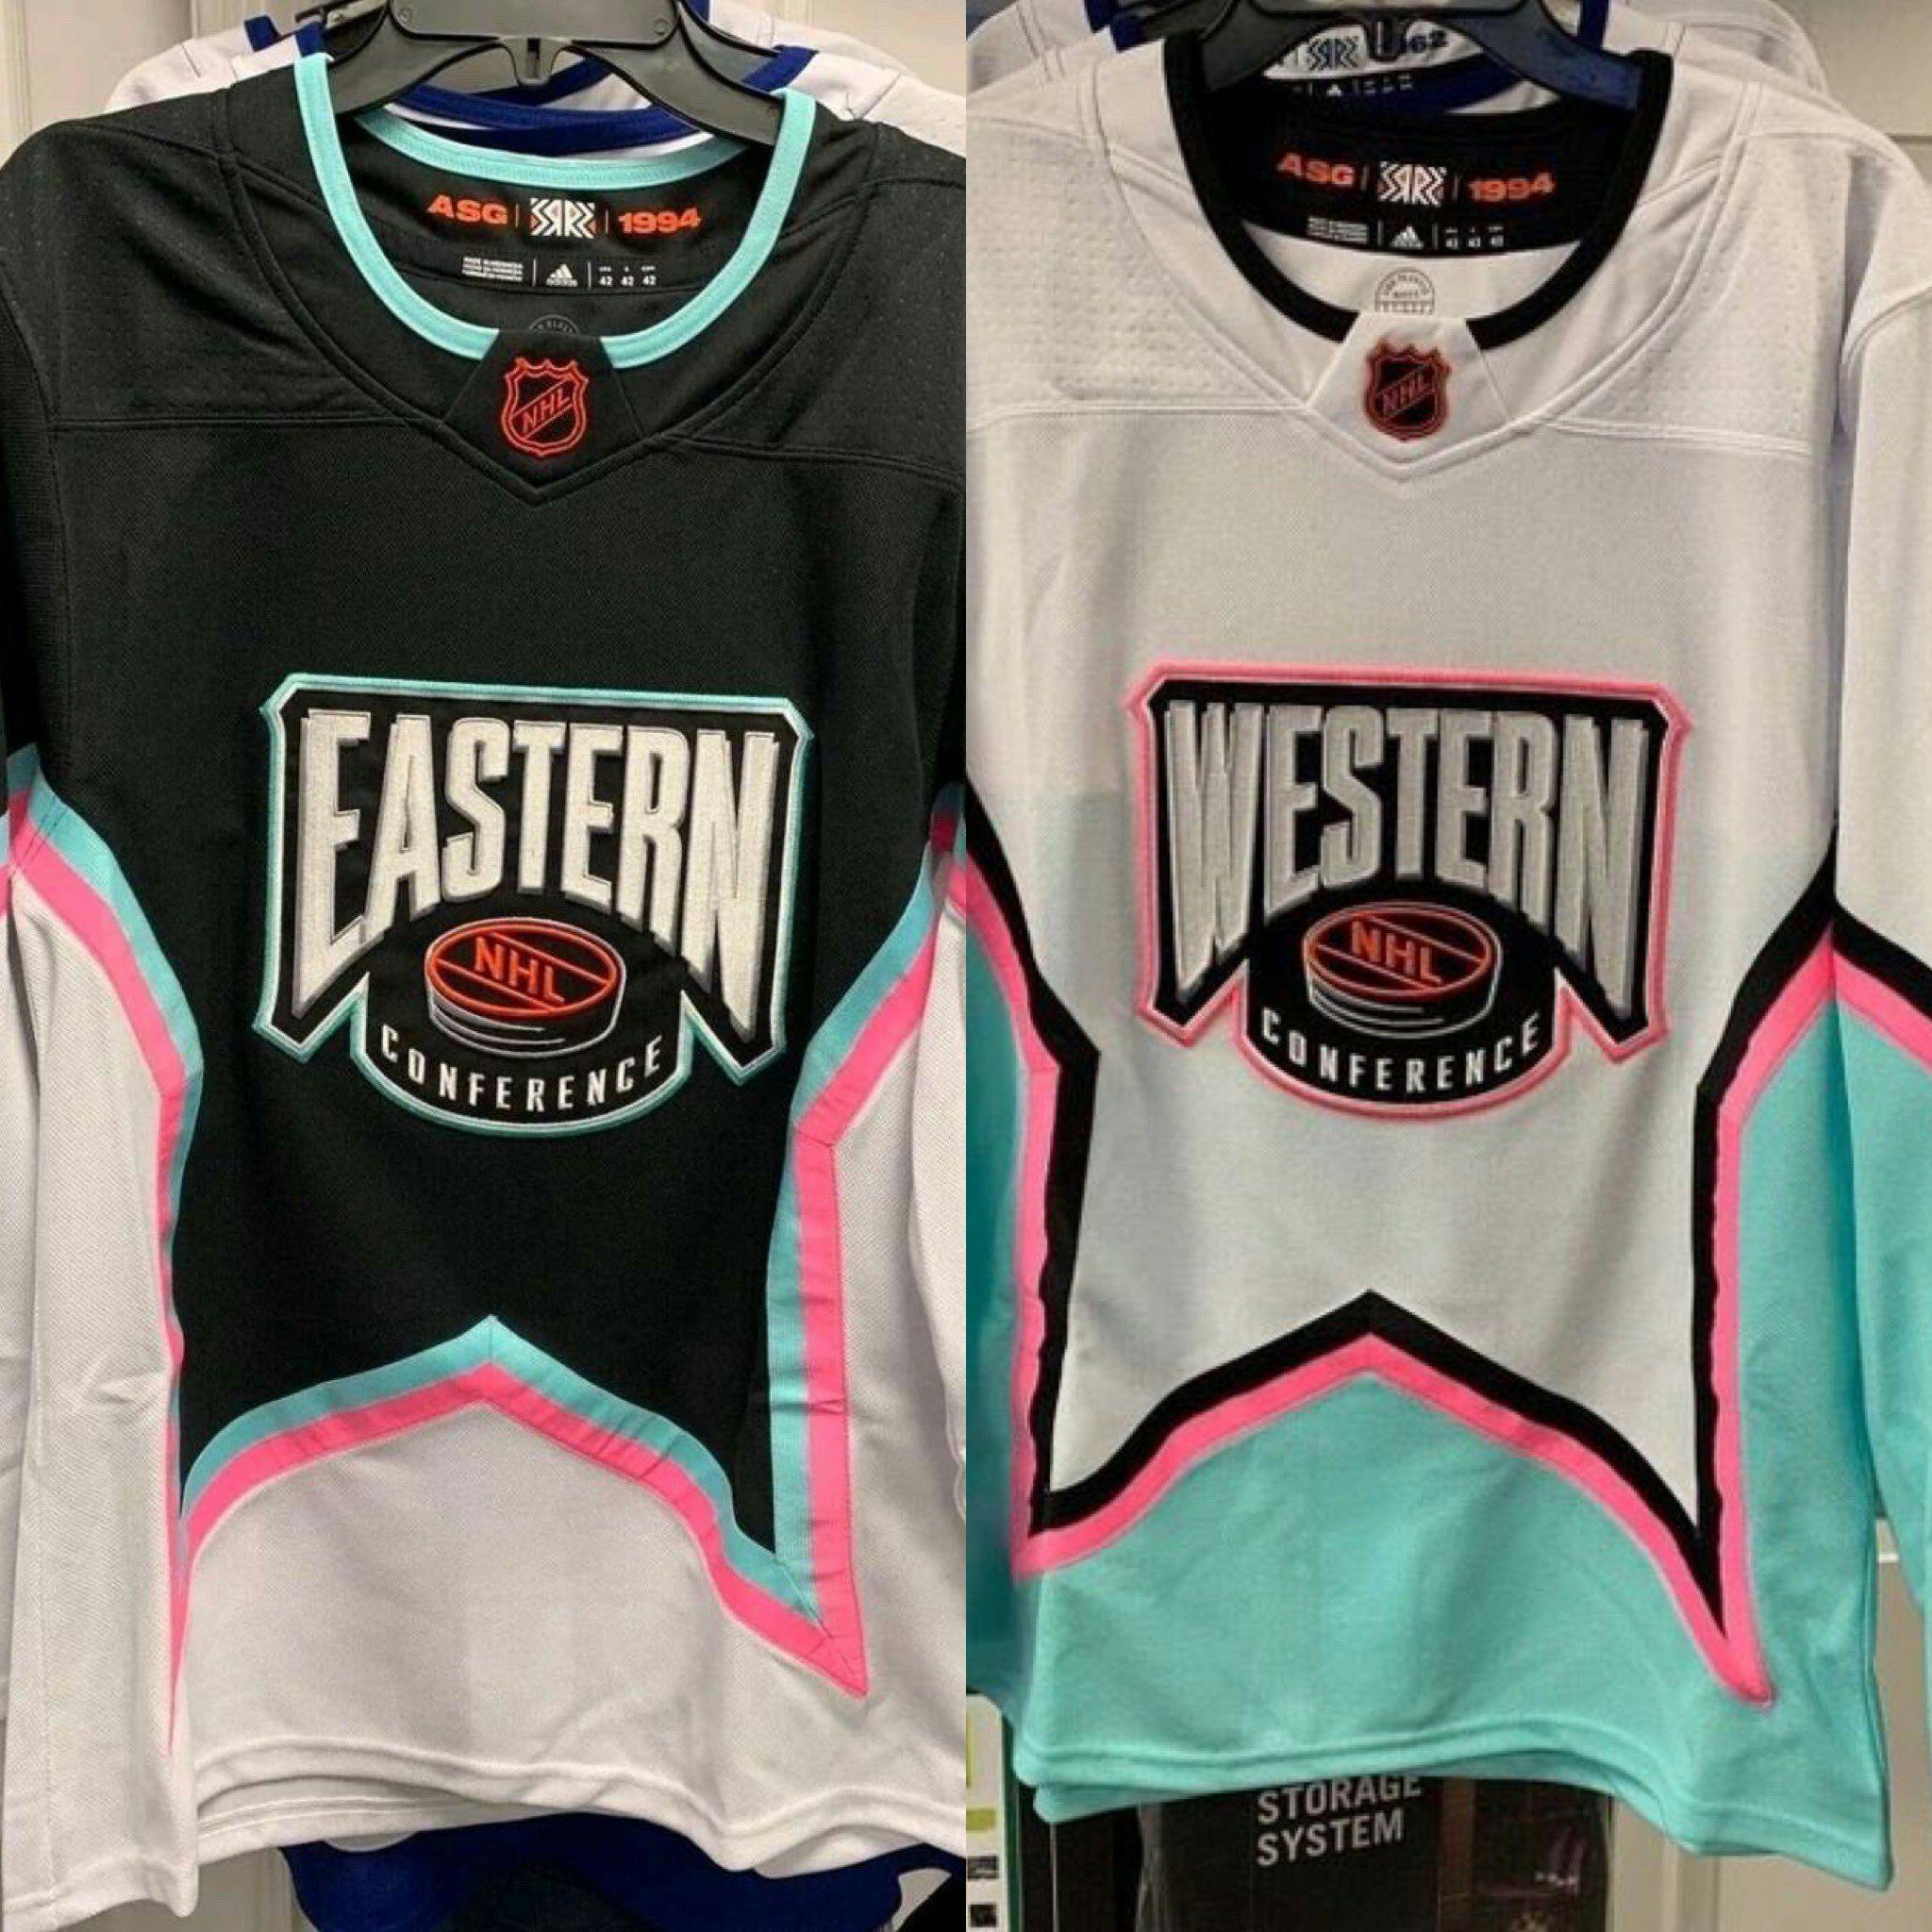 All-Star Jerseys have leaked AND THEY'RE SLEEVED?!